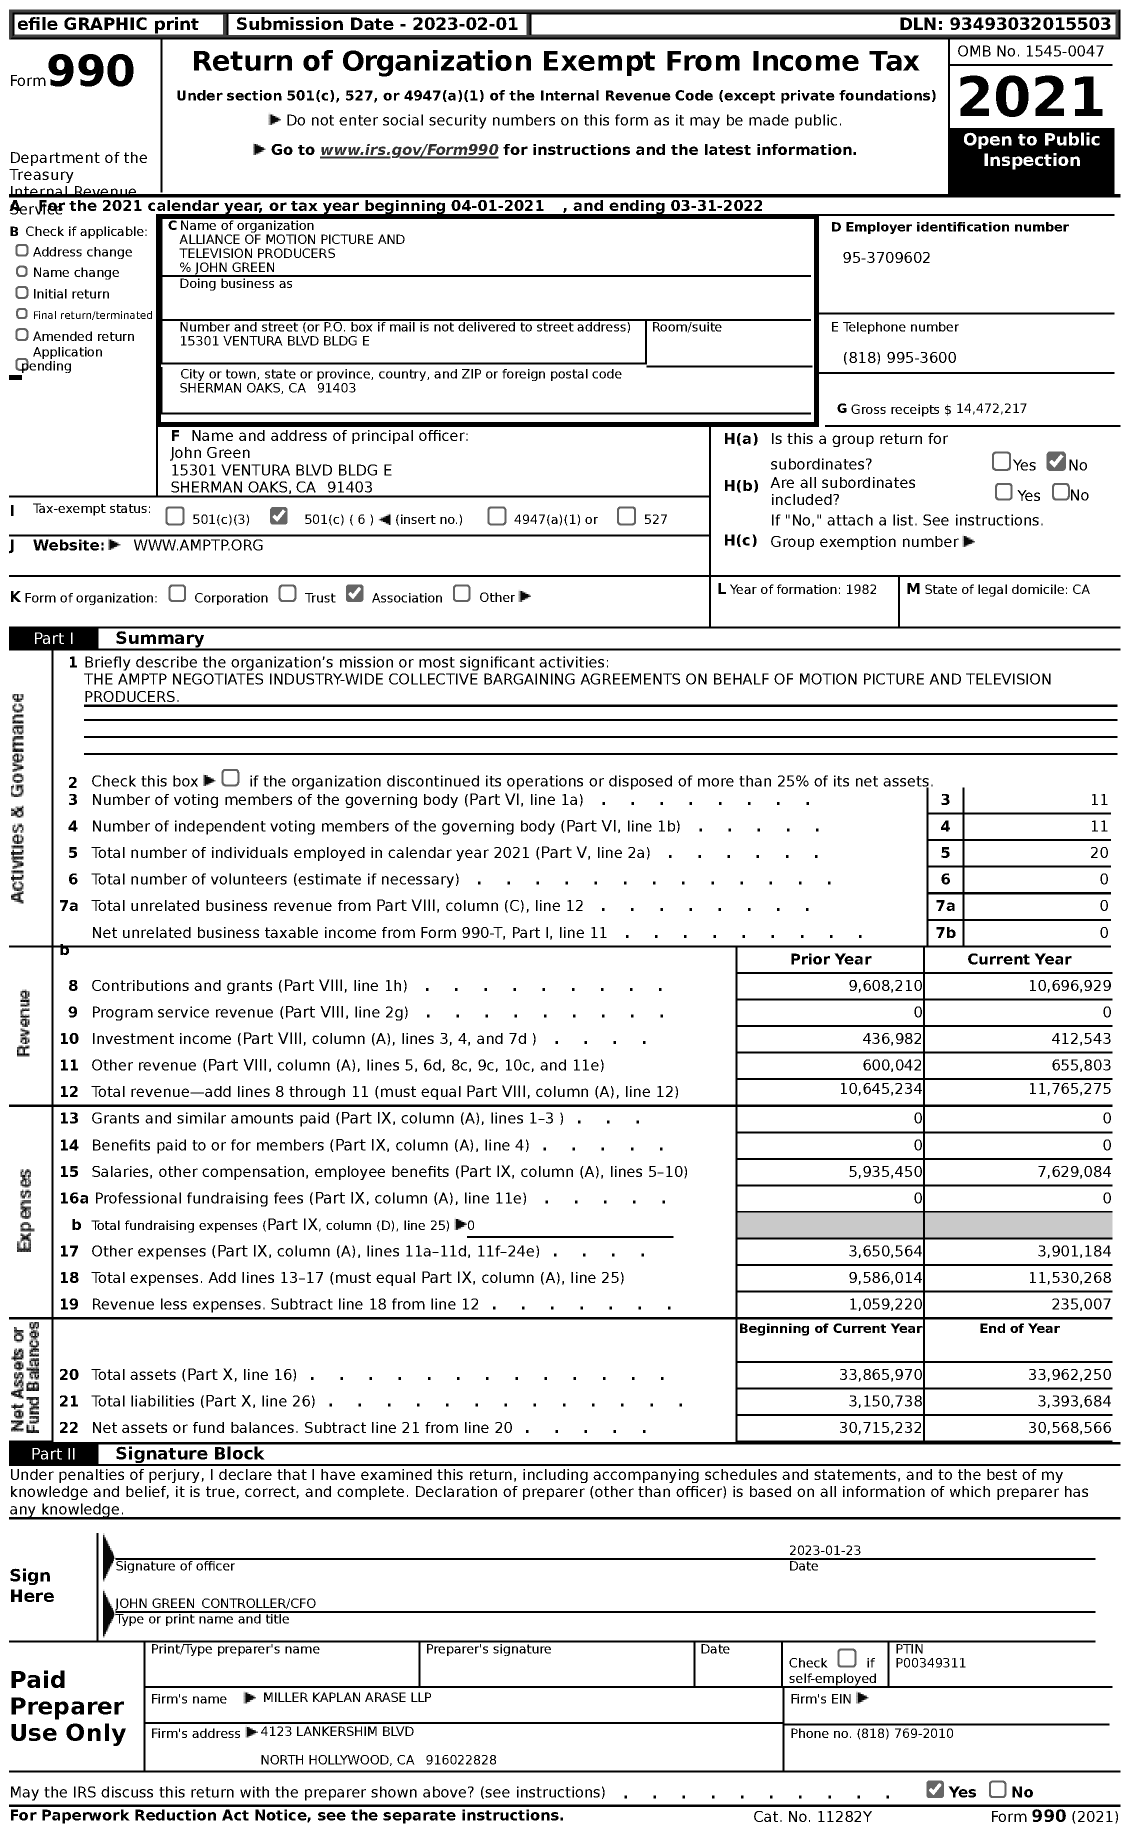 Image of first page of 2021 Form 990 for Alliance of Motion Picture and Television Producers (AMPTP)